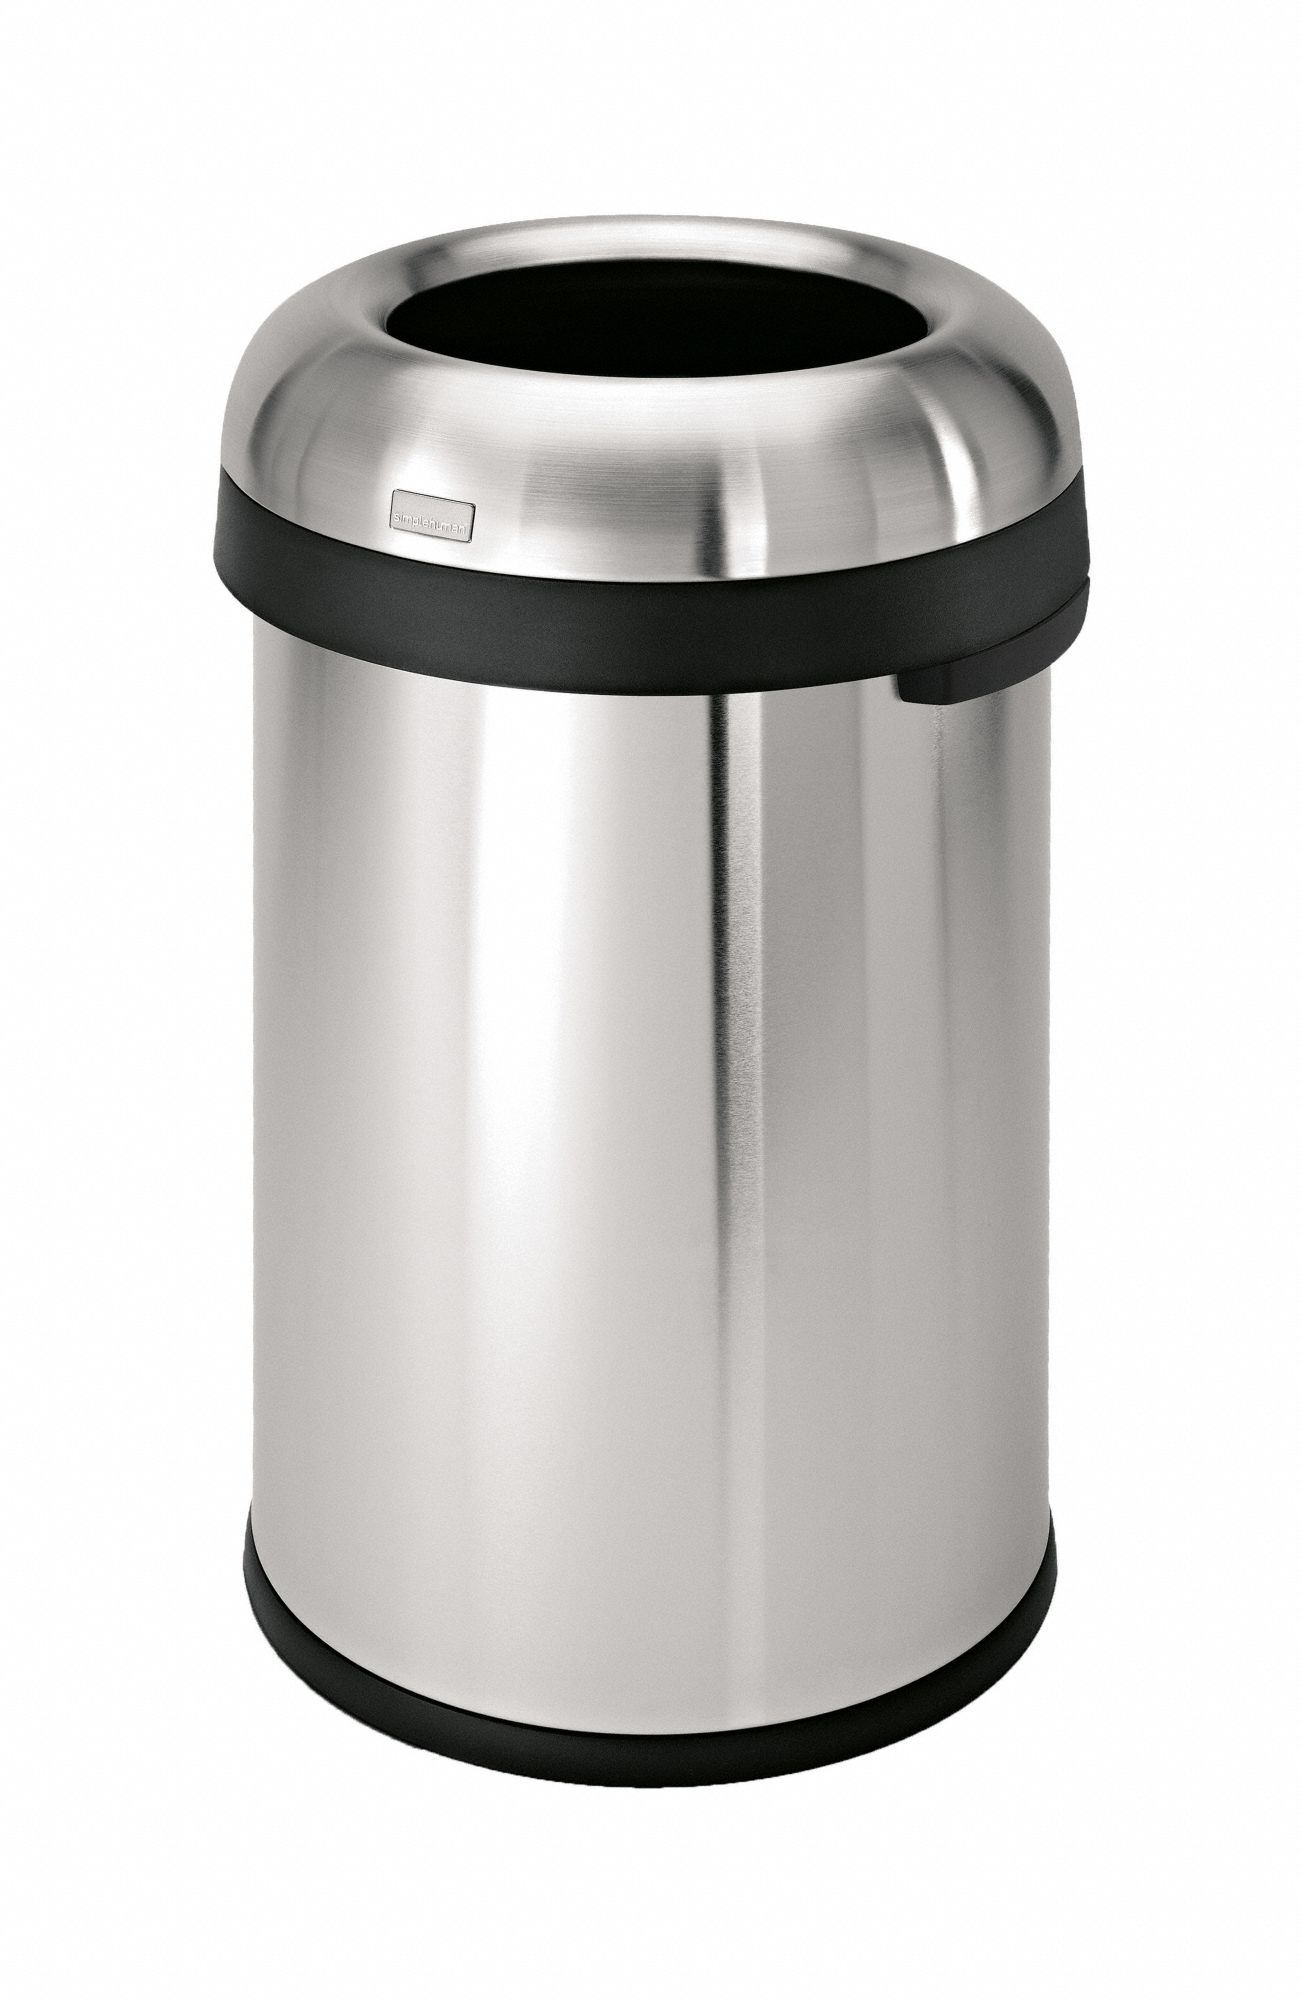 Trash Can: Stainless Steel, Dome Top, Silver, 21 gal Capacity, 17 4/5 in Wd/Dia